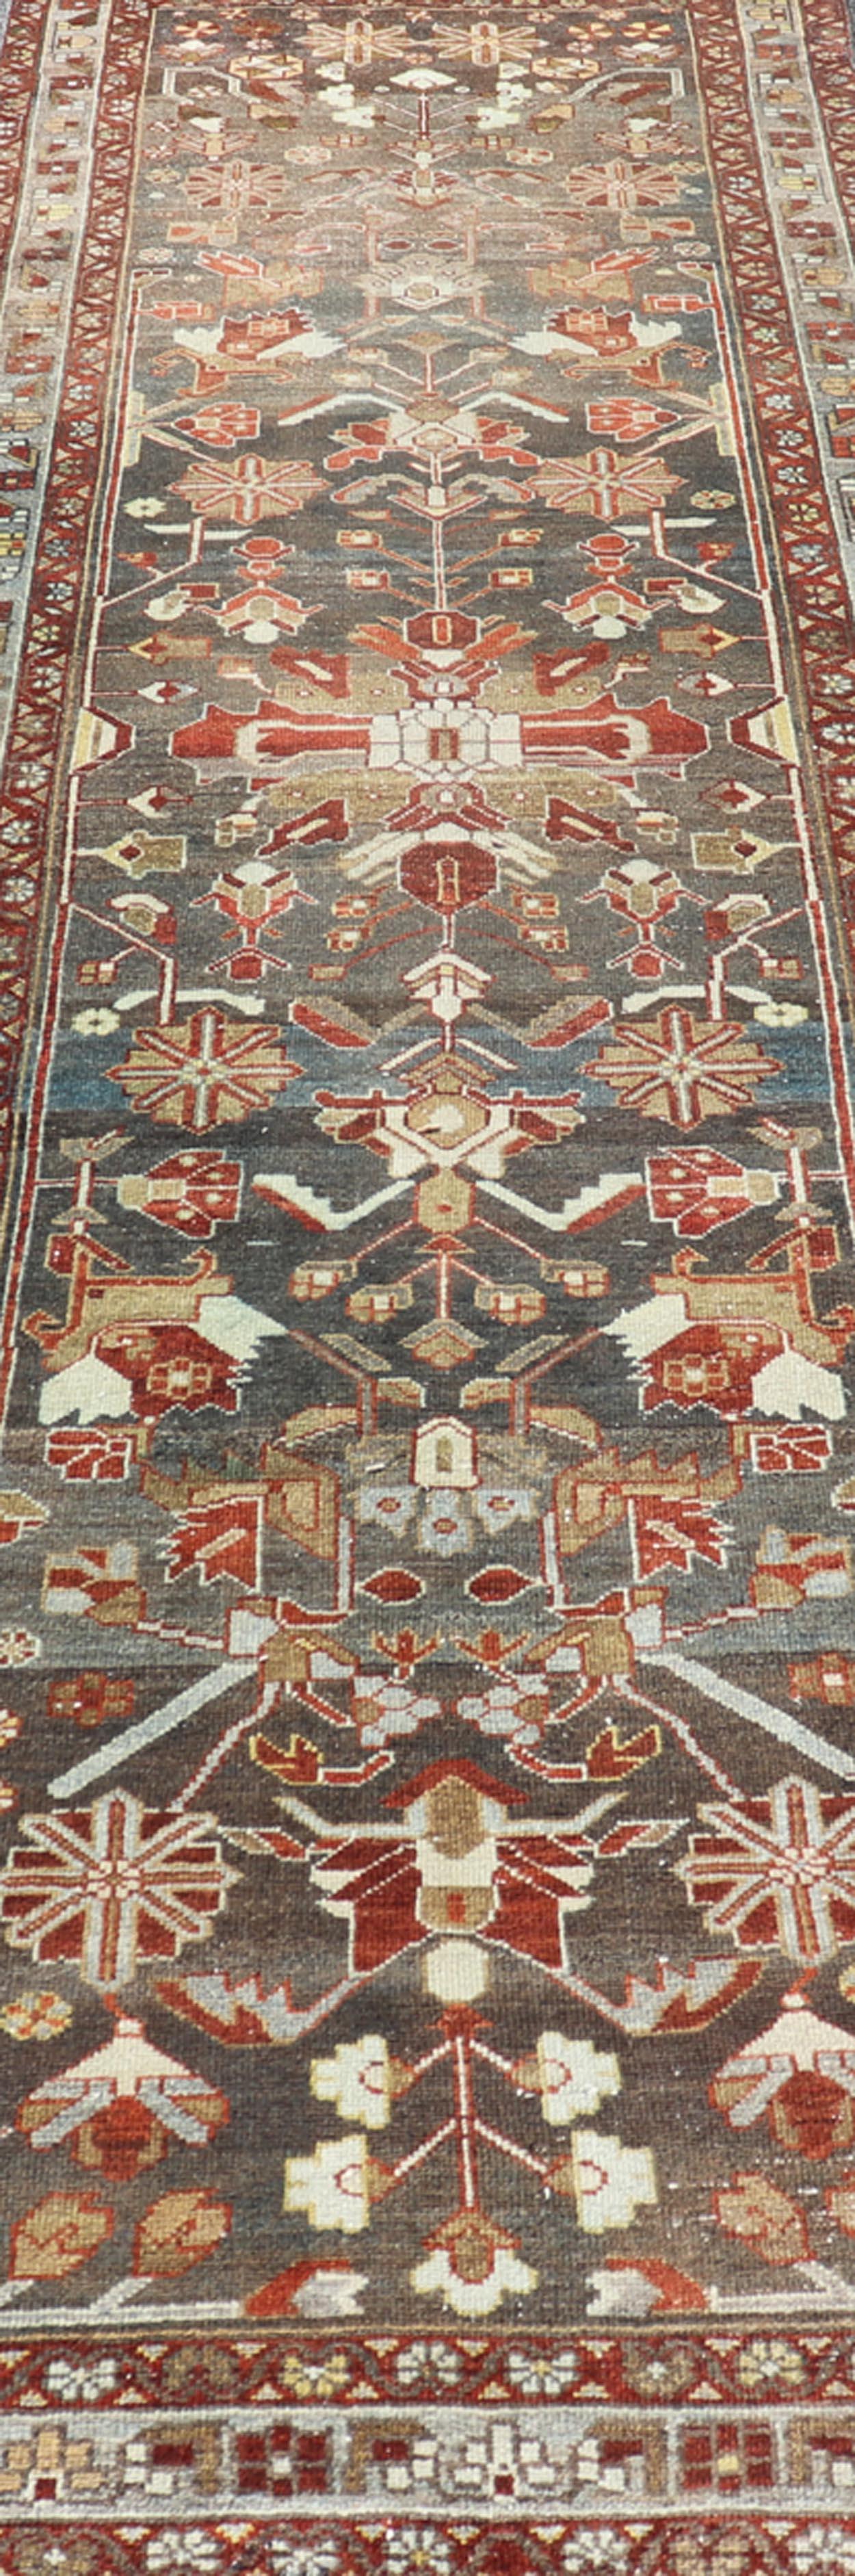 Antique Malayer Runner with Geometric Designs in Gray, Blue, Red, and Tan In Good Condition For Sale In Atlanta, GA